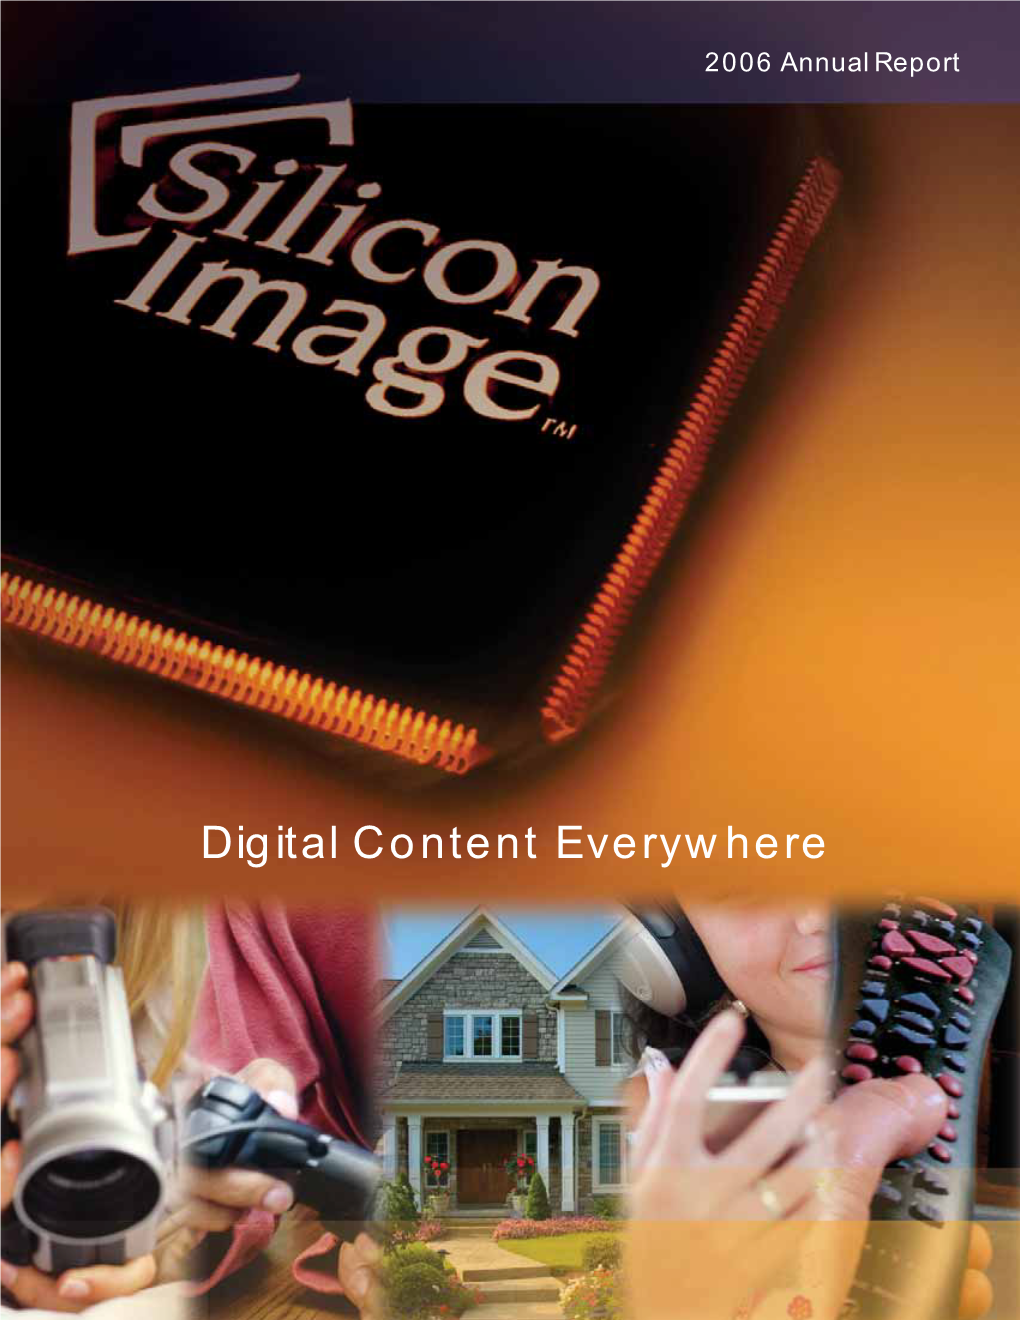 Digital Content Everywhere Dear Fellow Stockholders in 2006 Silicon Image Delivered Another Year of Record Revenue, Strong Operating Margins, Net Income and Cash Flow